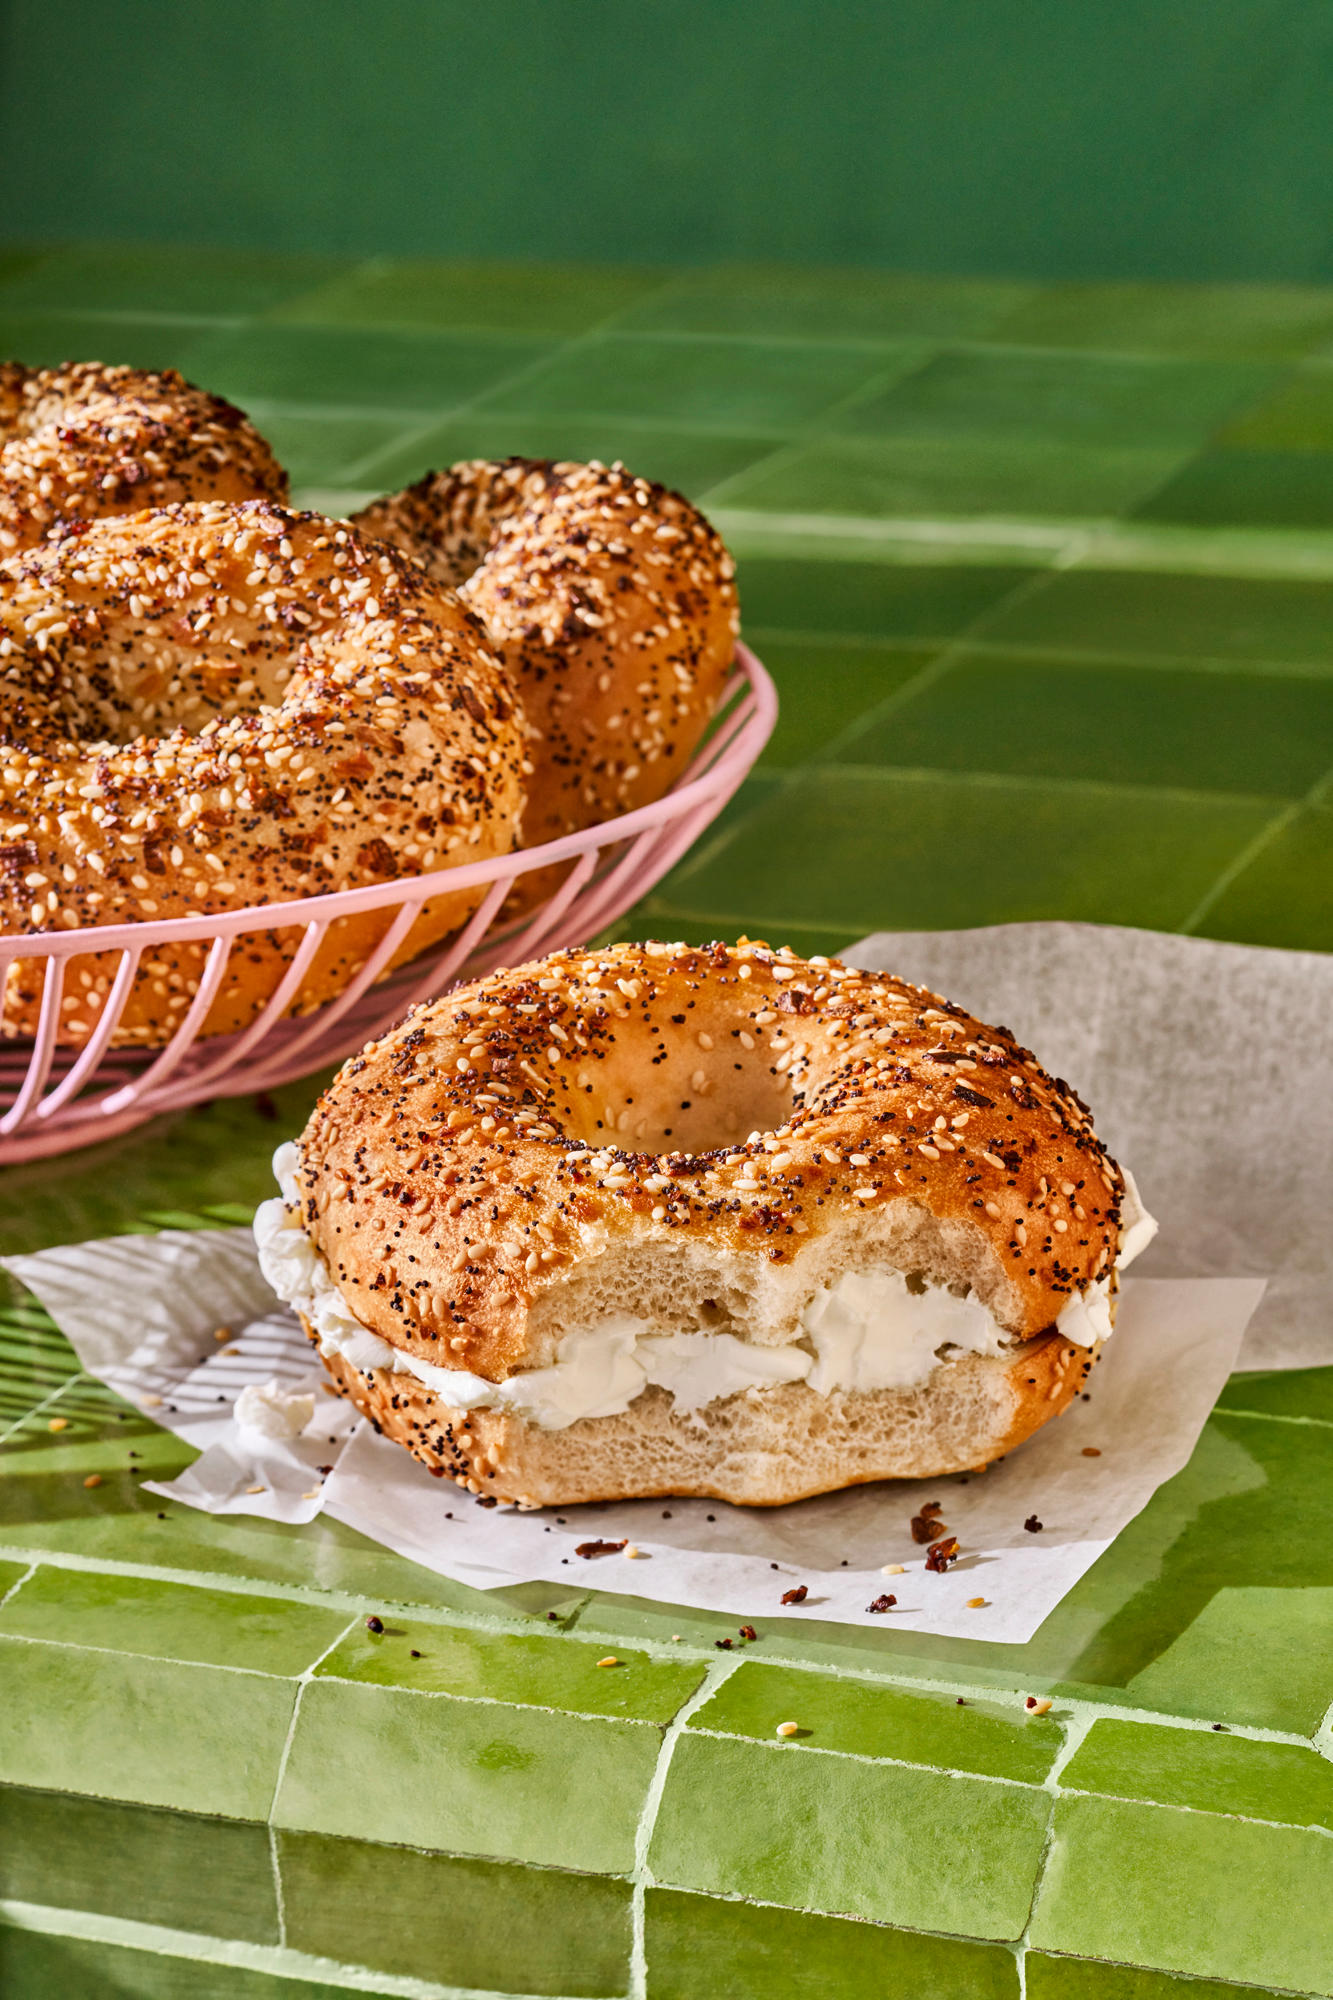 Everything Bagel with Plain Cream Cheese Panera Bread Tracy (209)855-8014